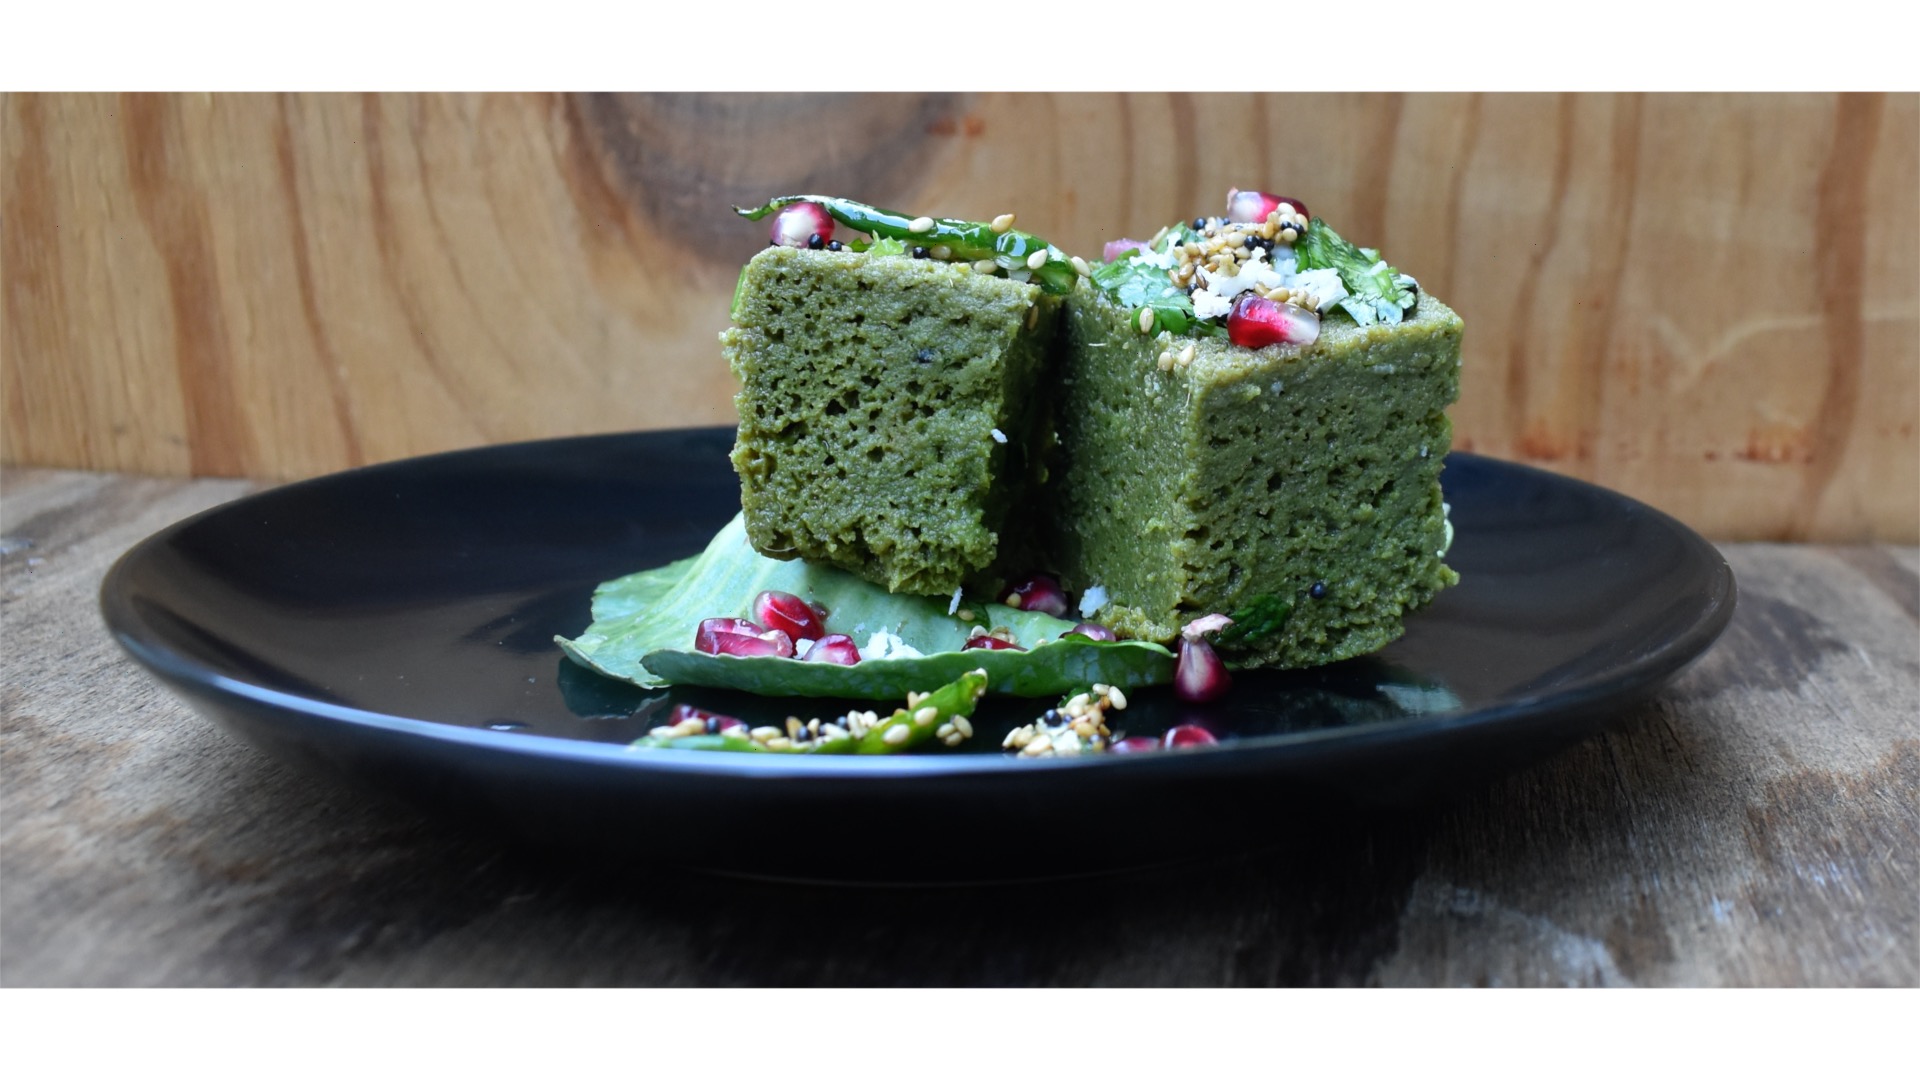 Moong Palak Dhokla, Lentil Spinach Steamed Cake